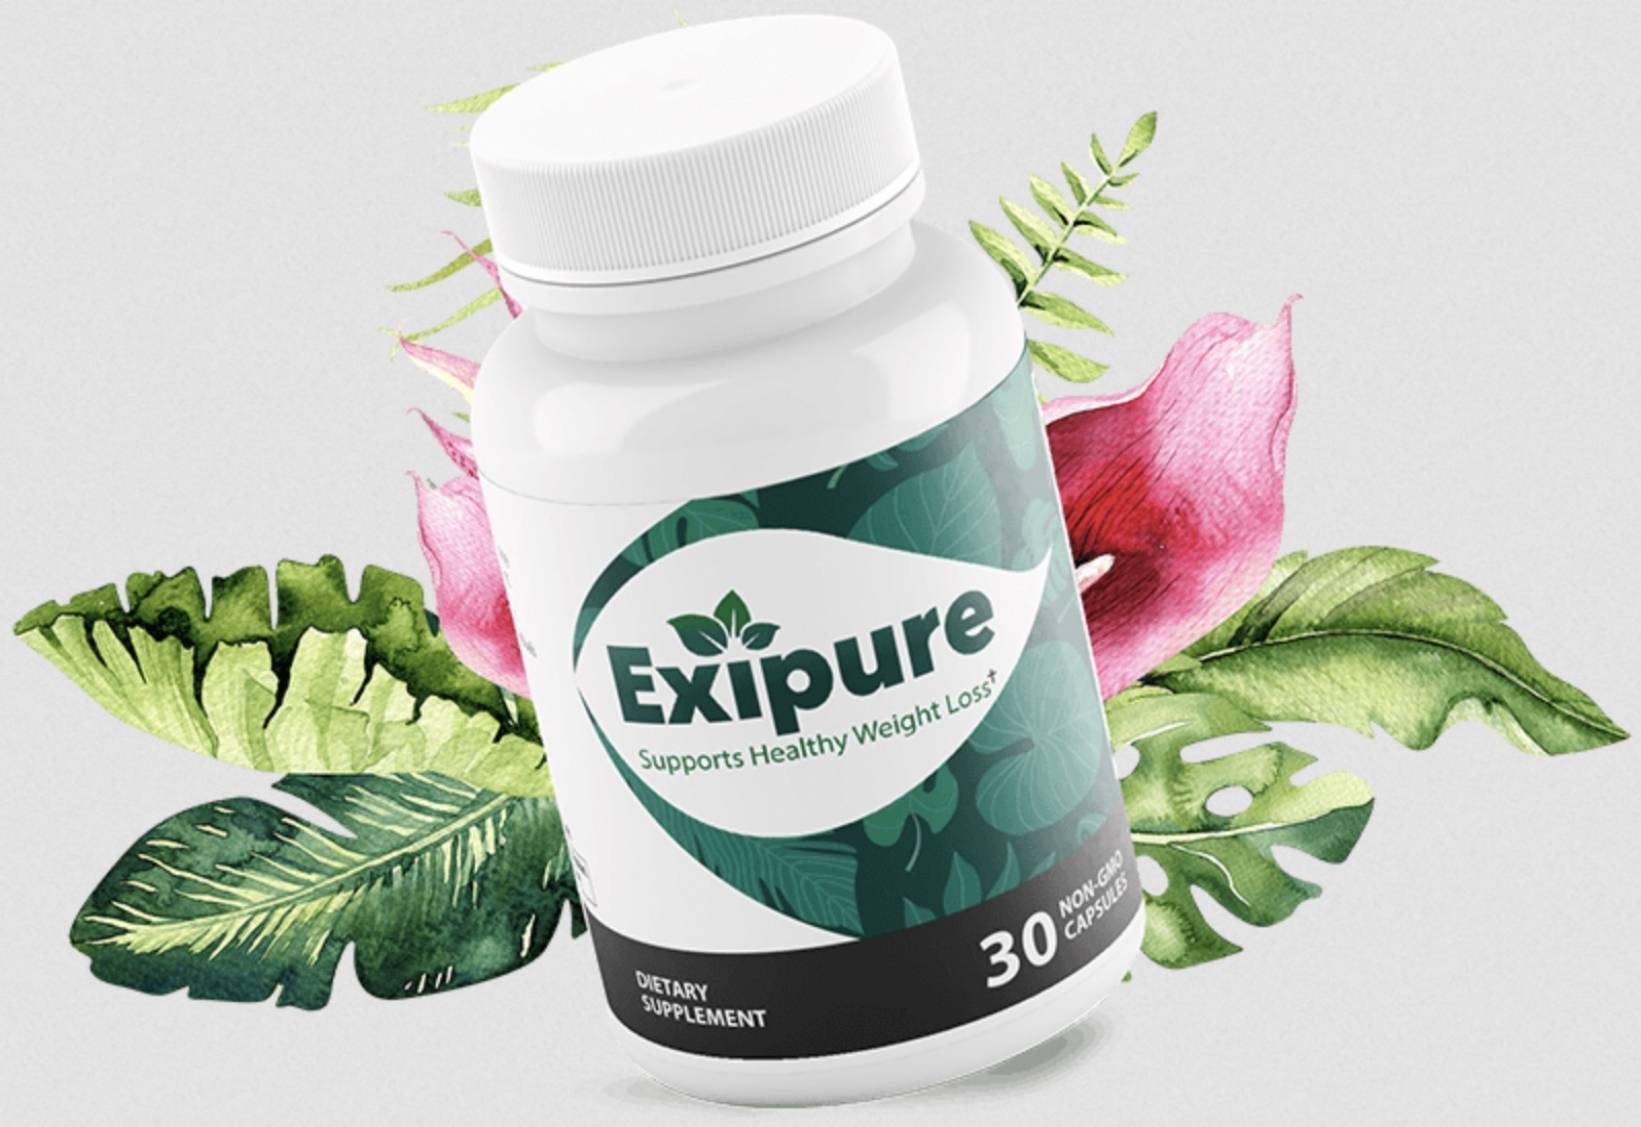 Exipure Side Effects